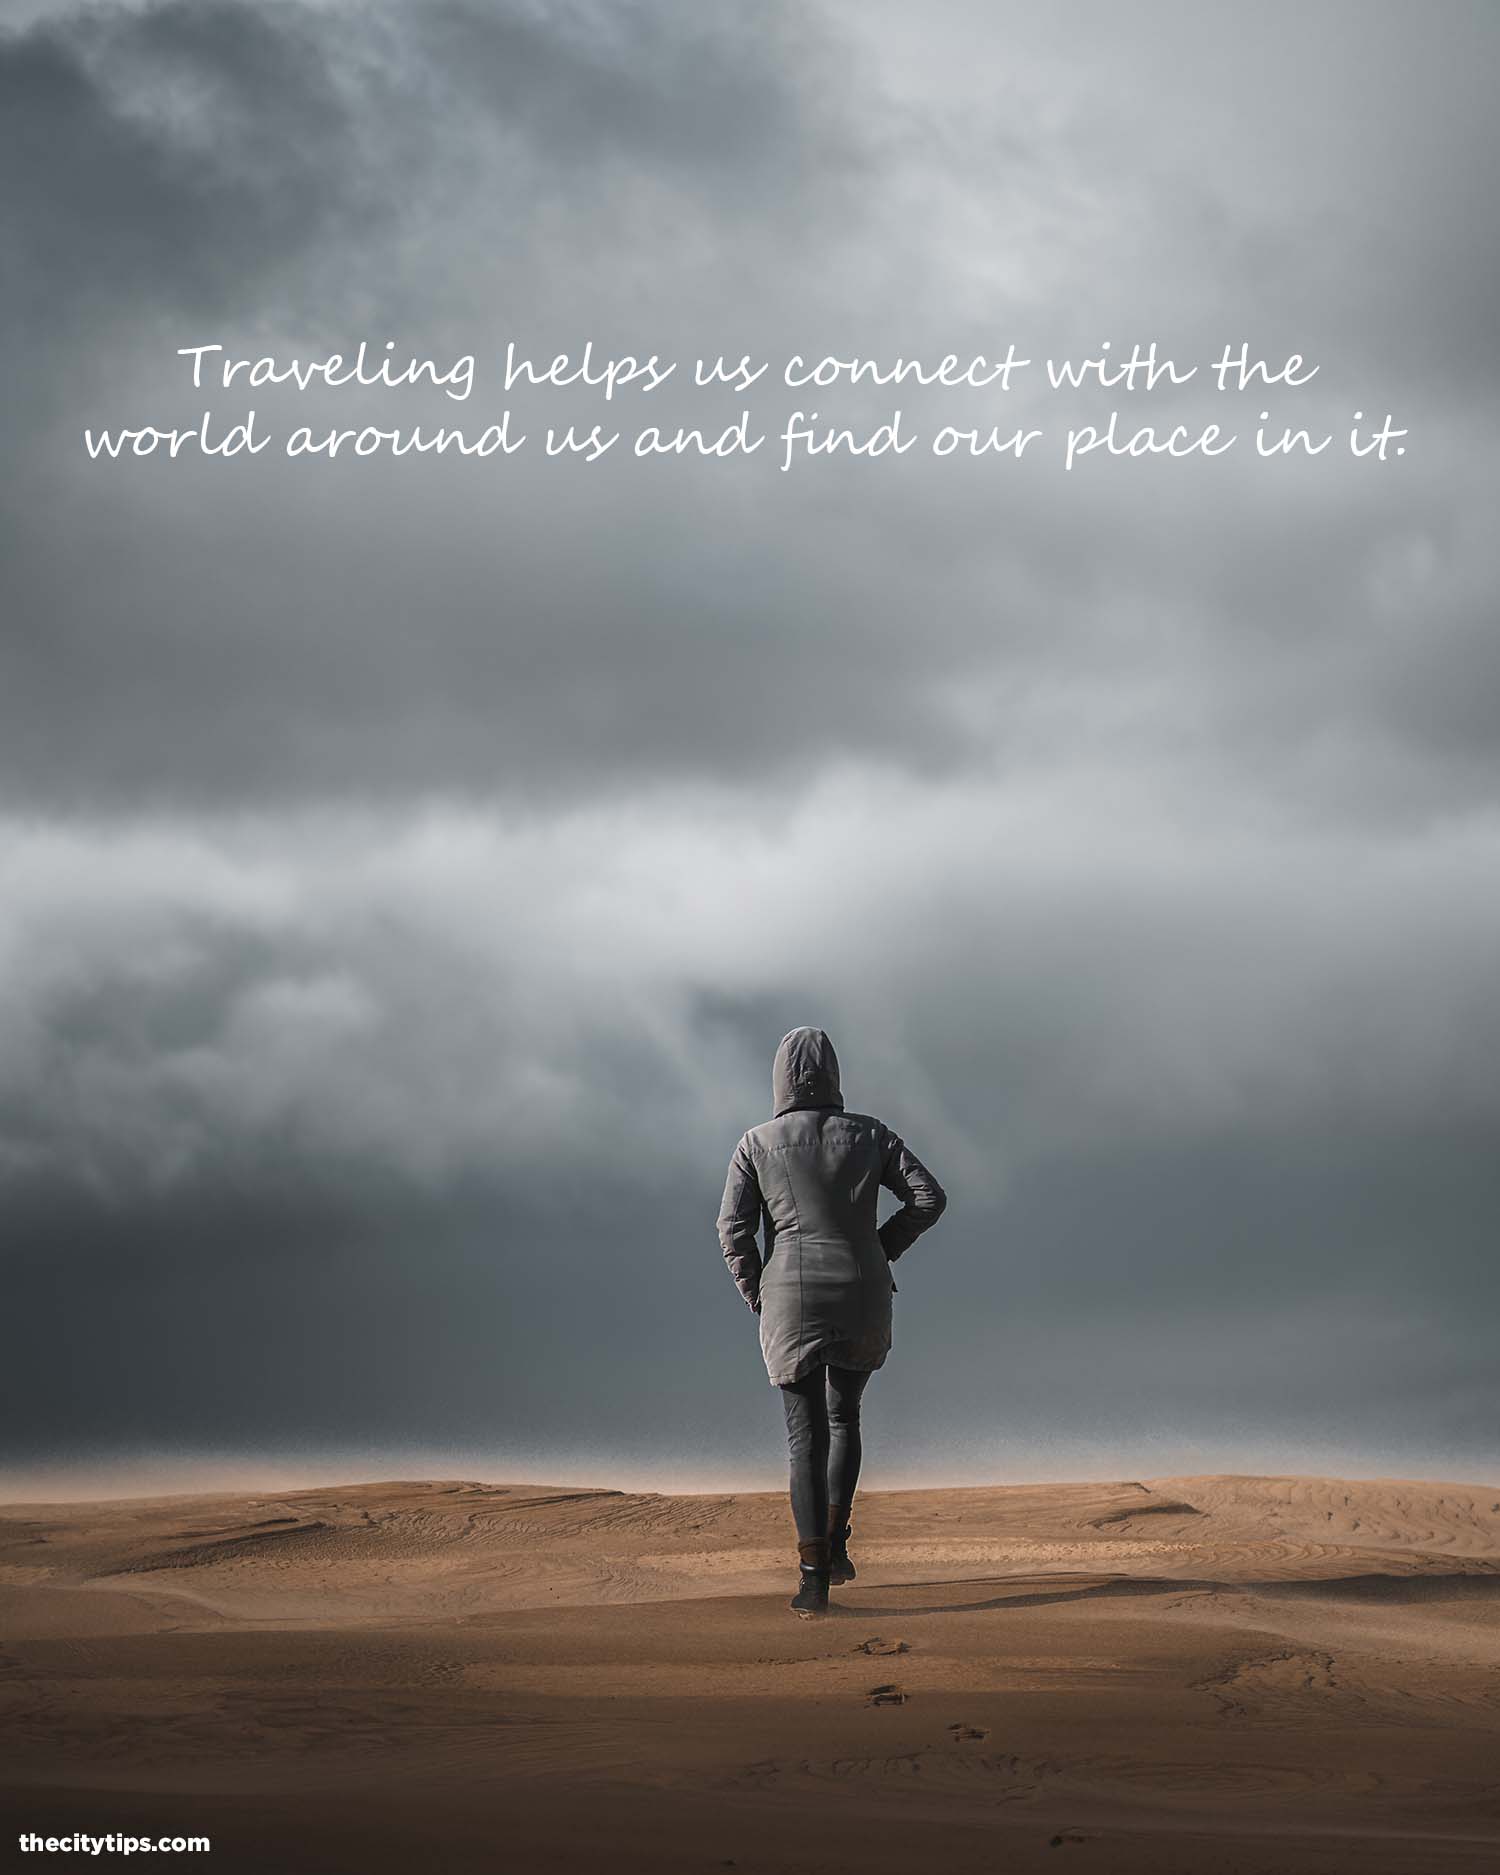 "Traveling helps us connect with the world around us and find our place in it." by Anonymous